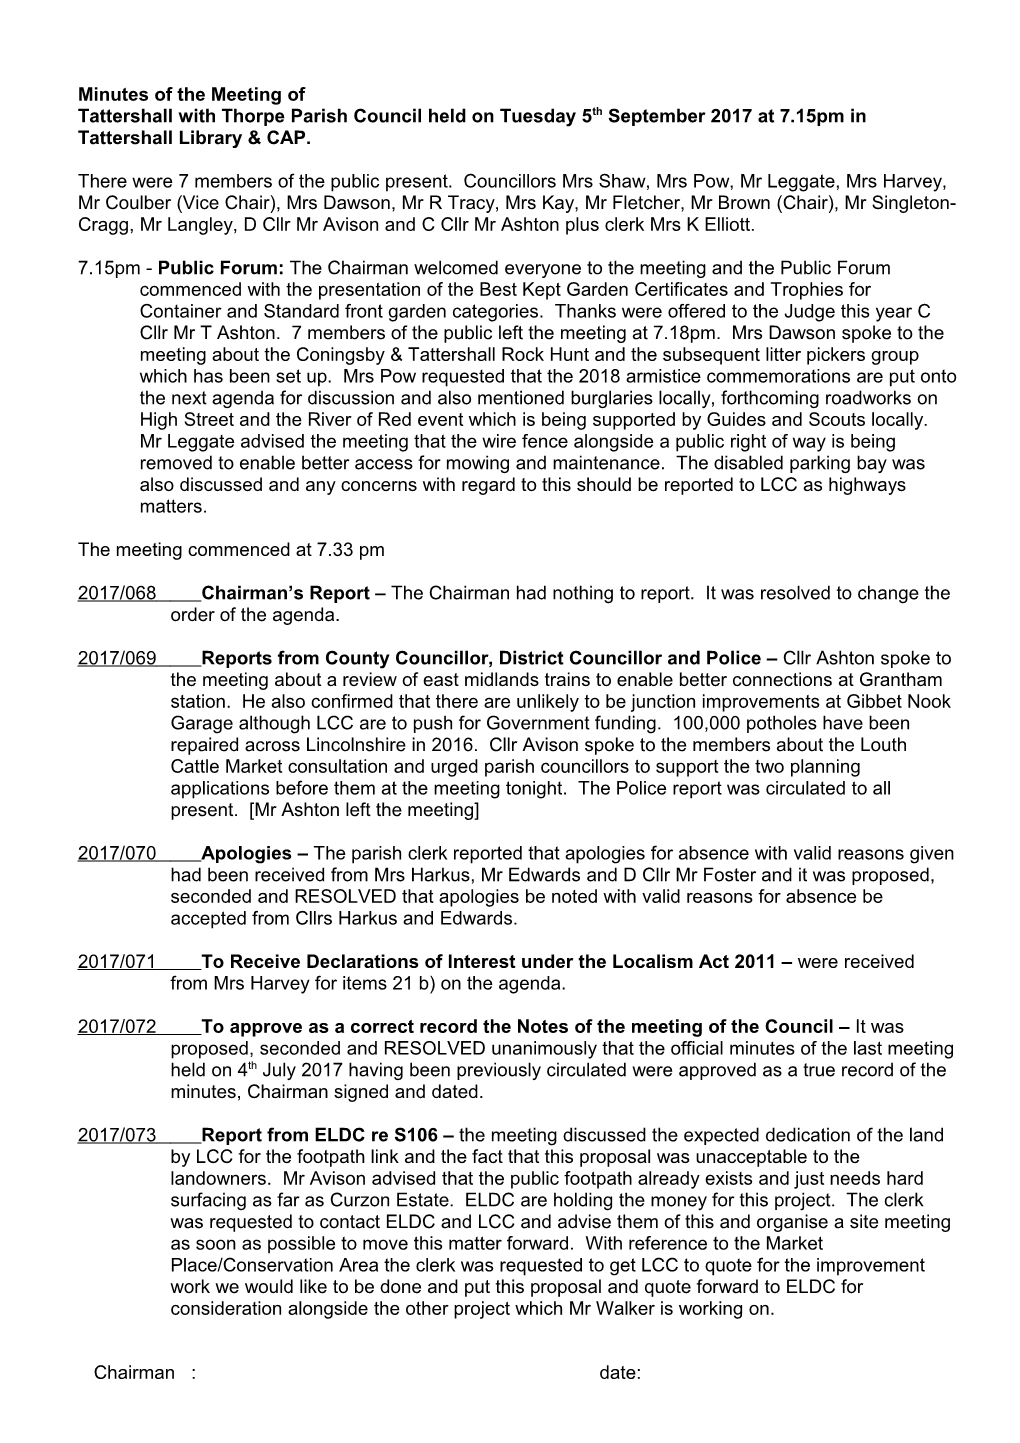 Minutes of the Meeting Held of Tattershall with Thorpe Parish Council Held on 6Th October